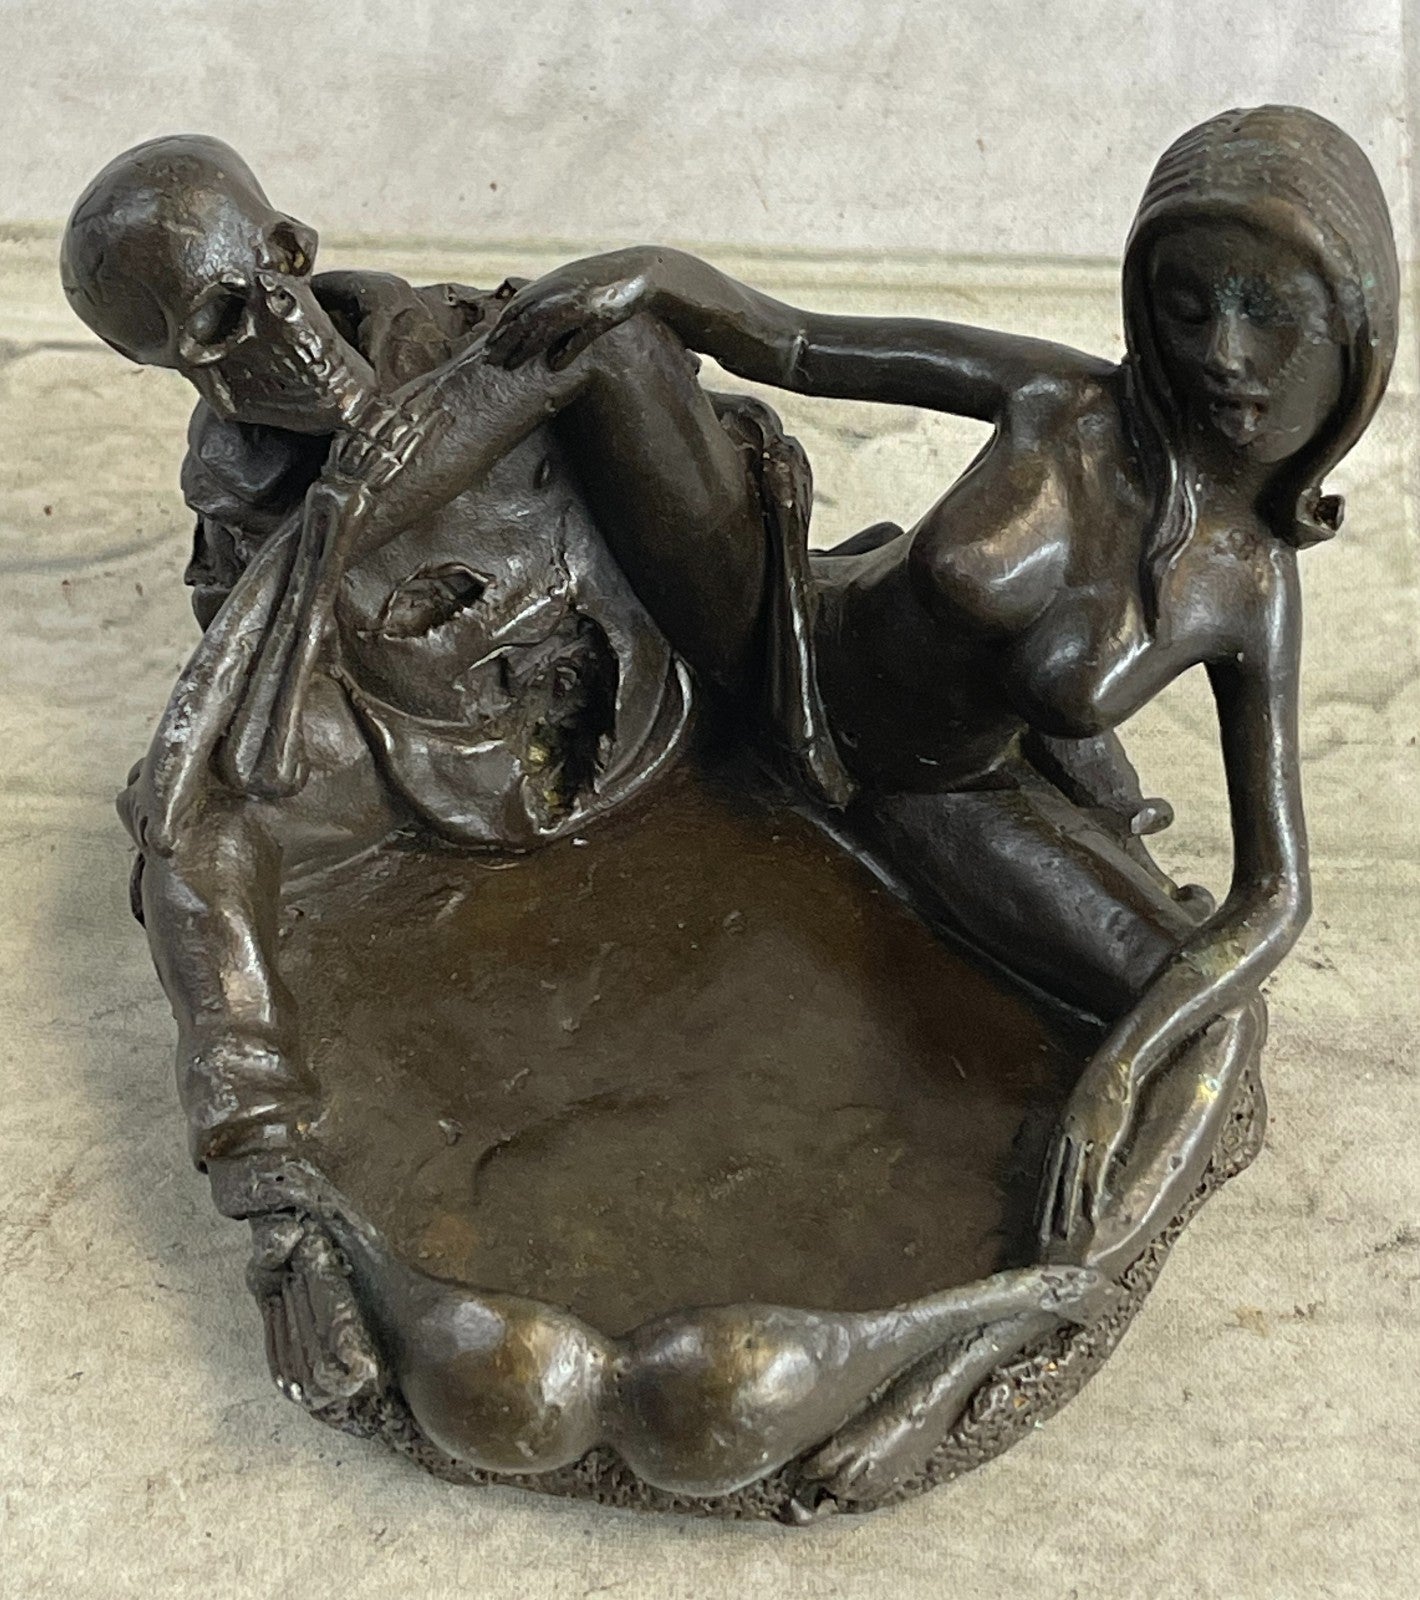 100% Solid Bronze Erotic Art Deco Skeleton With Nymph Ashtray Sculpture Figurine